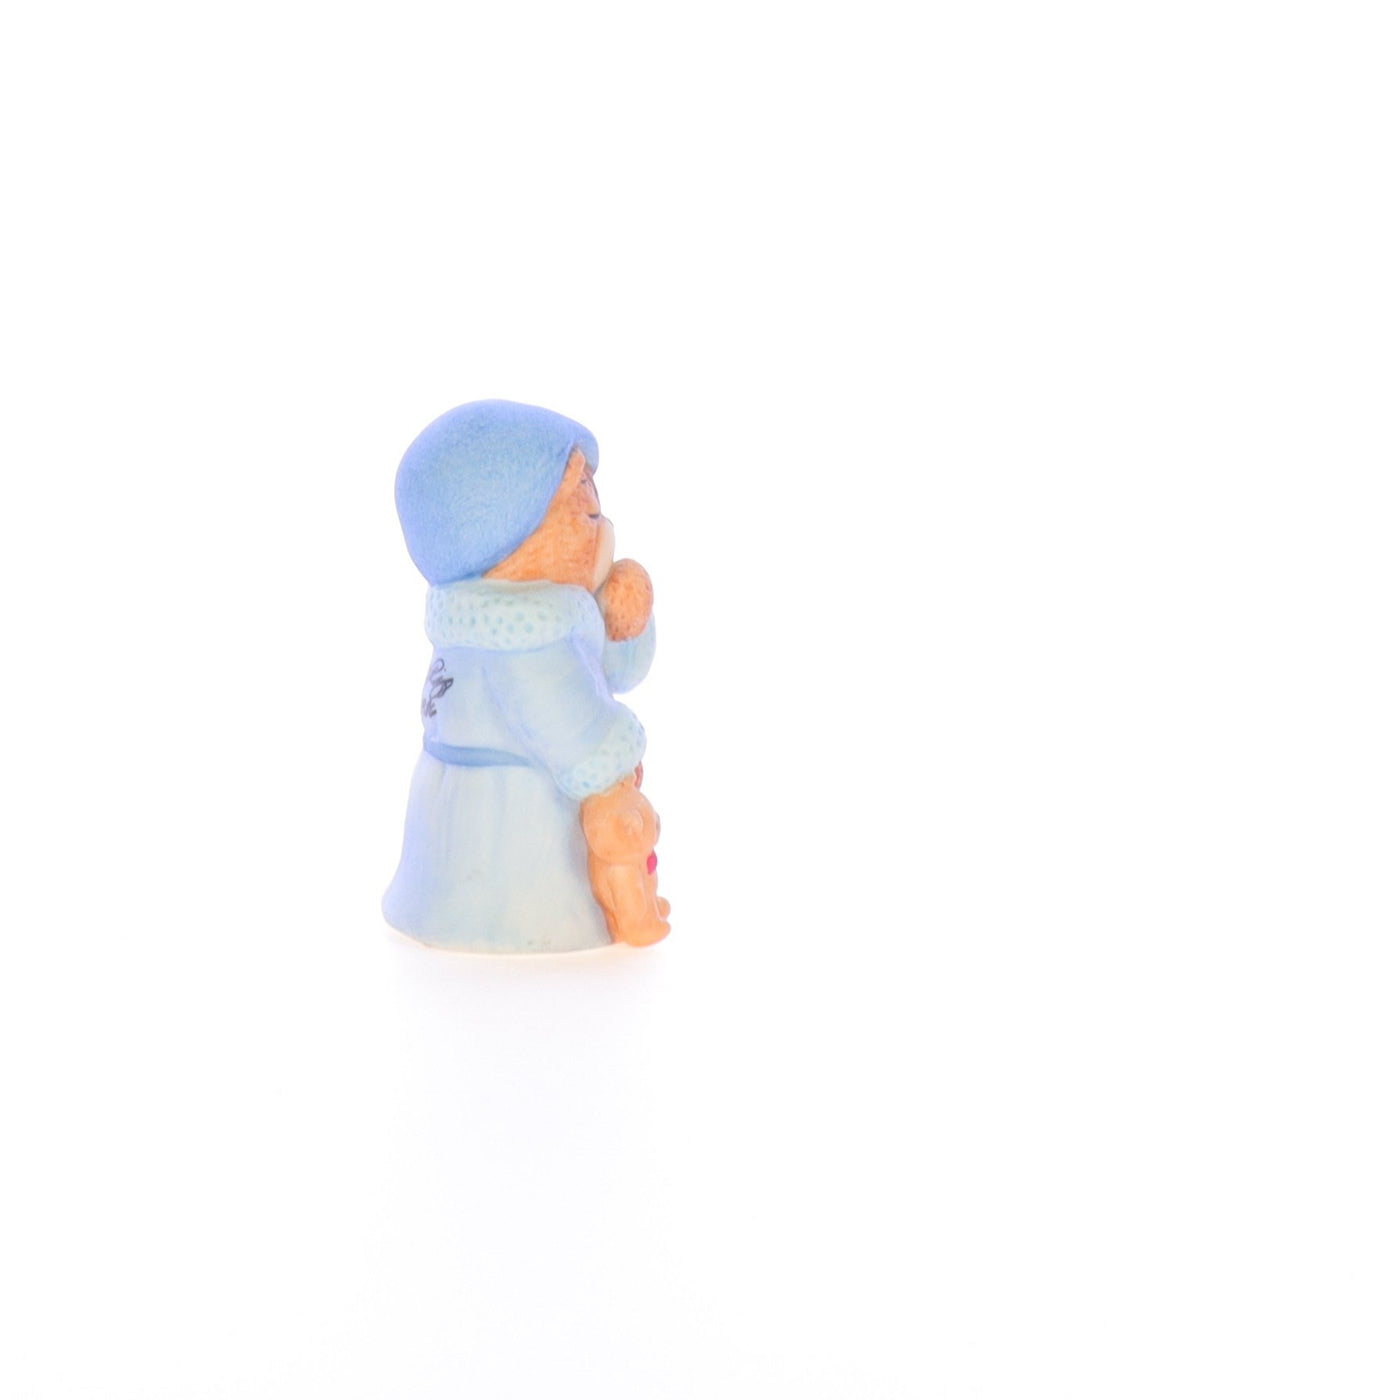 Lucy_And_Me_by_Lucy_Atwell_Porcelain_Figurine_Sleepy_Bear_in_Pajamas_Lucy_Unknown_046_07